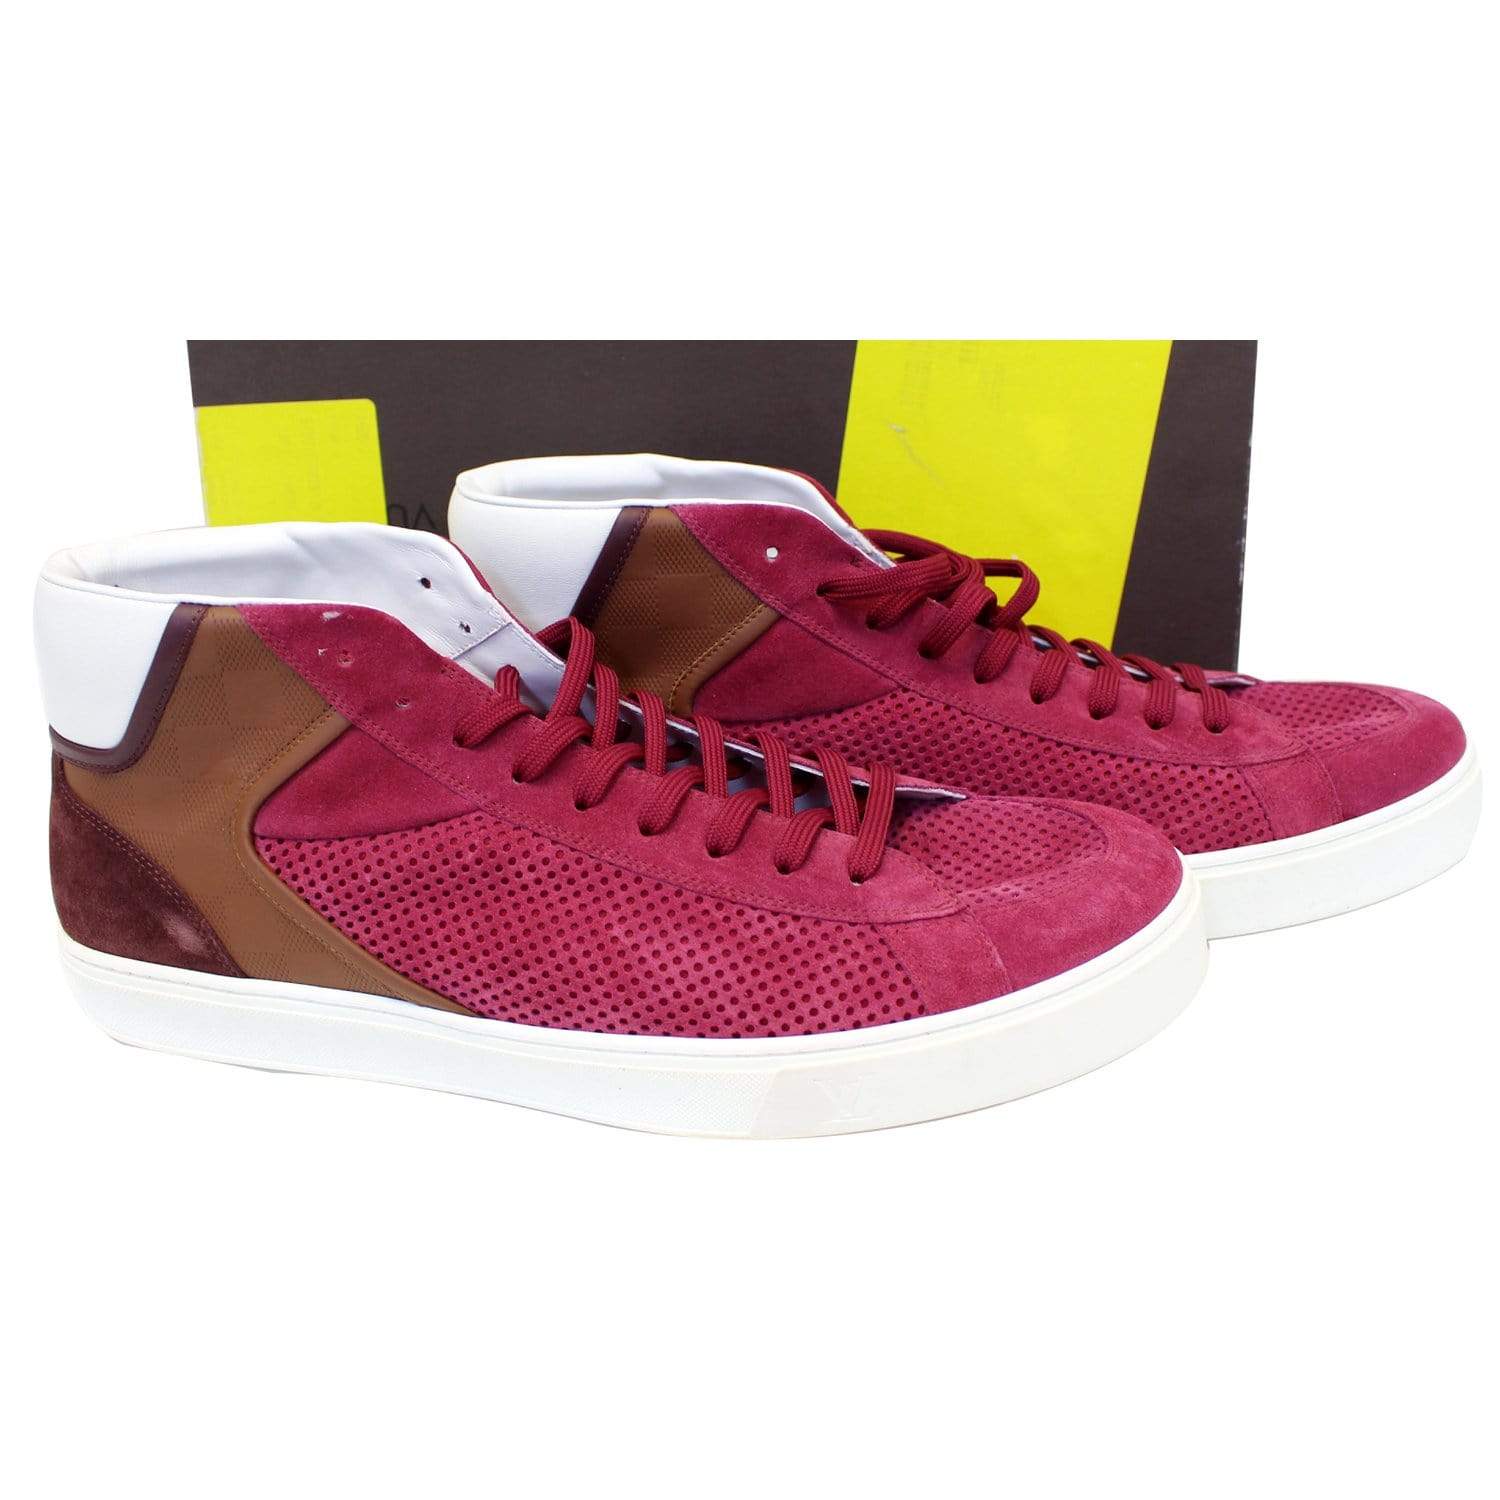 Louis Vuitton Player Sneakers Suede Leather Framboise